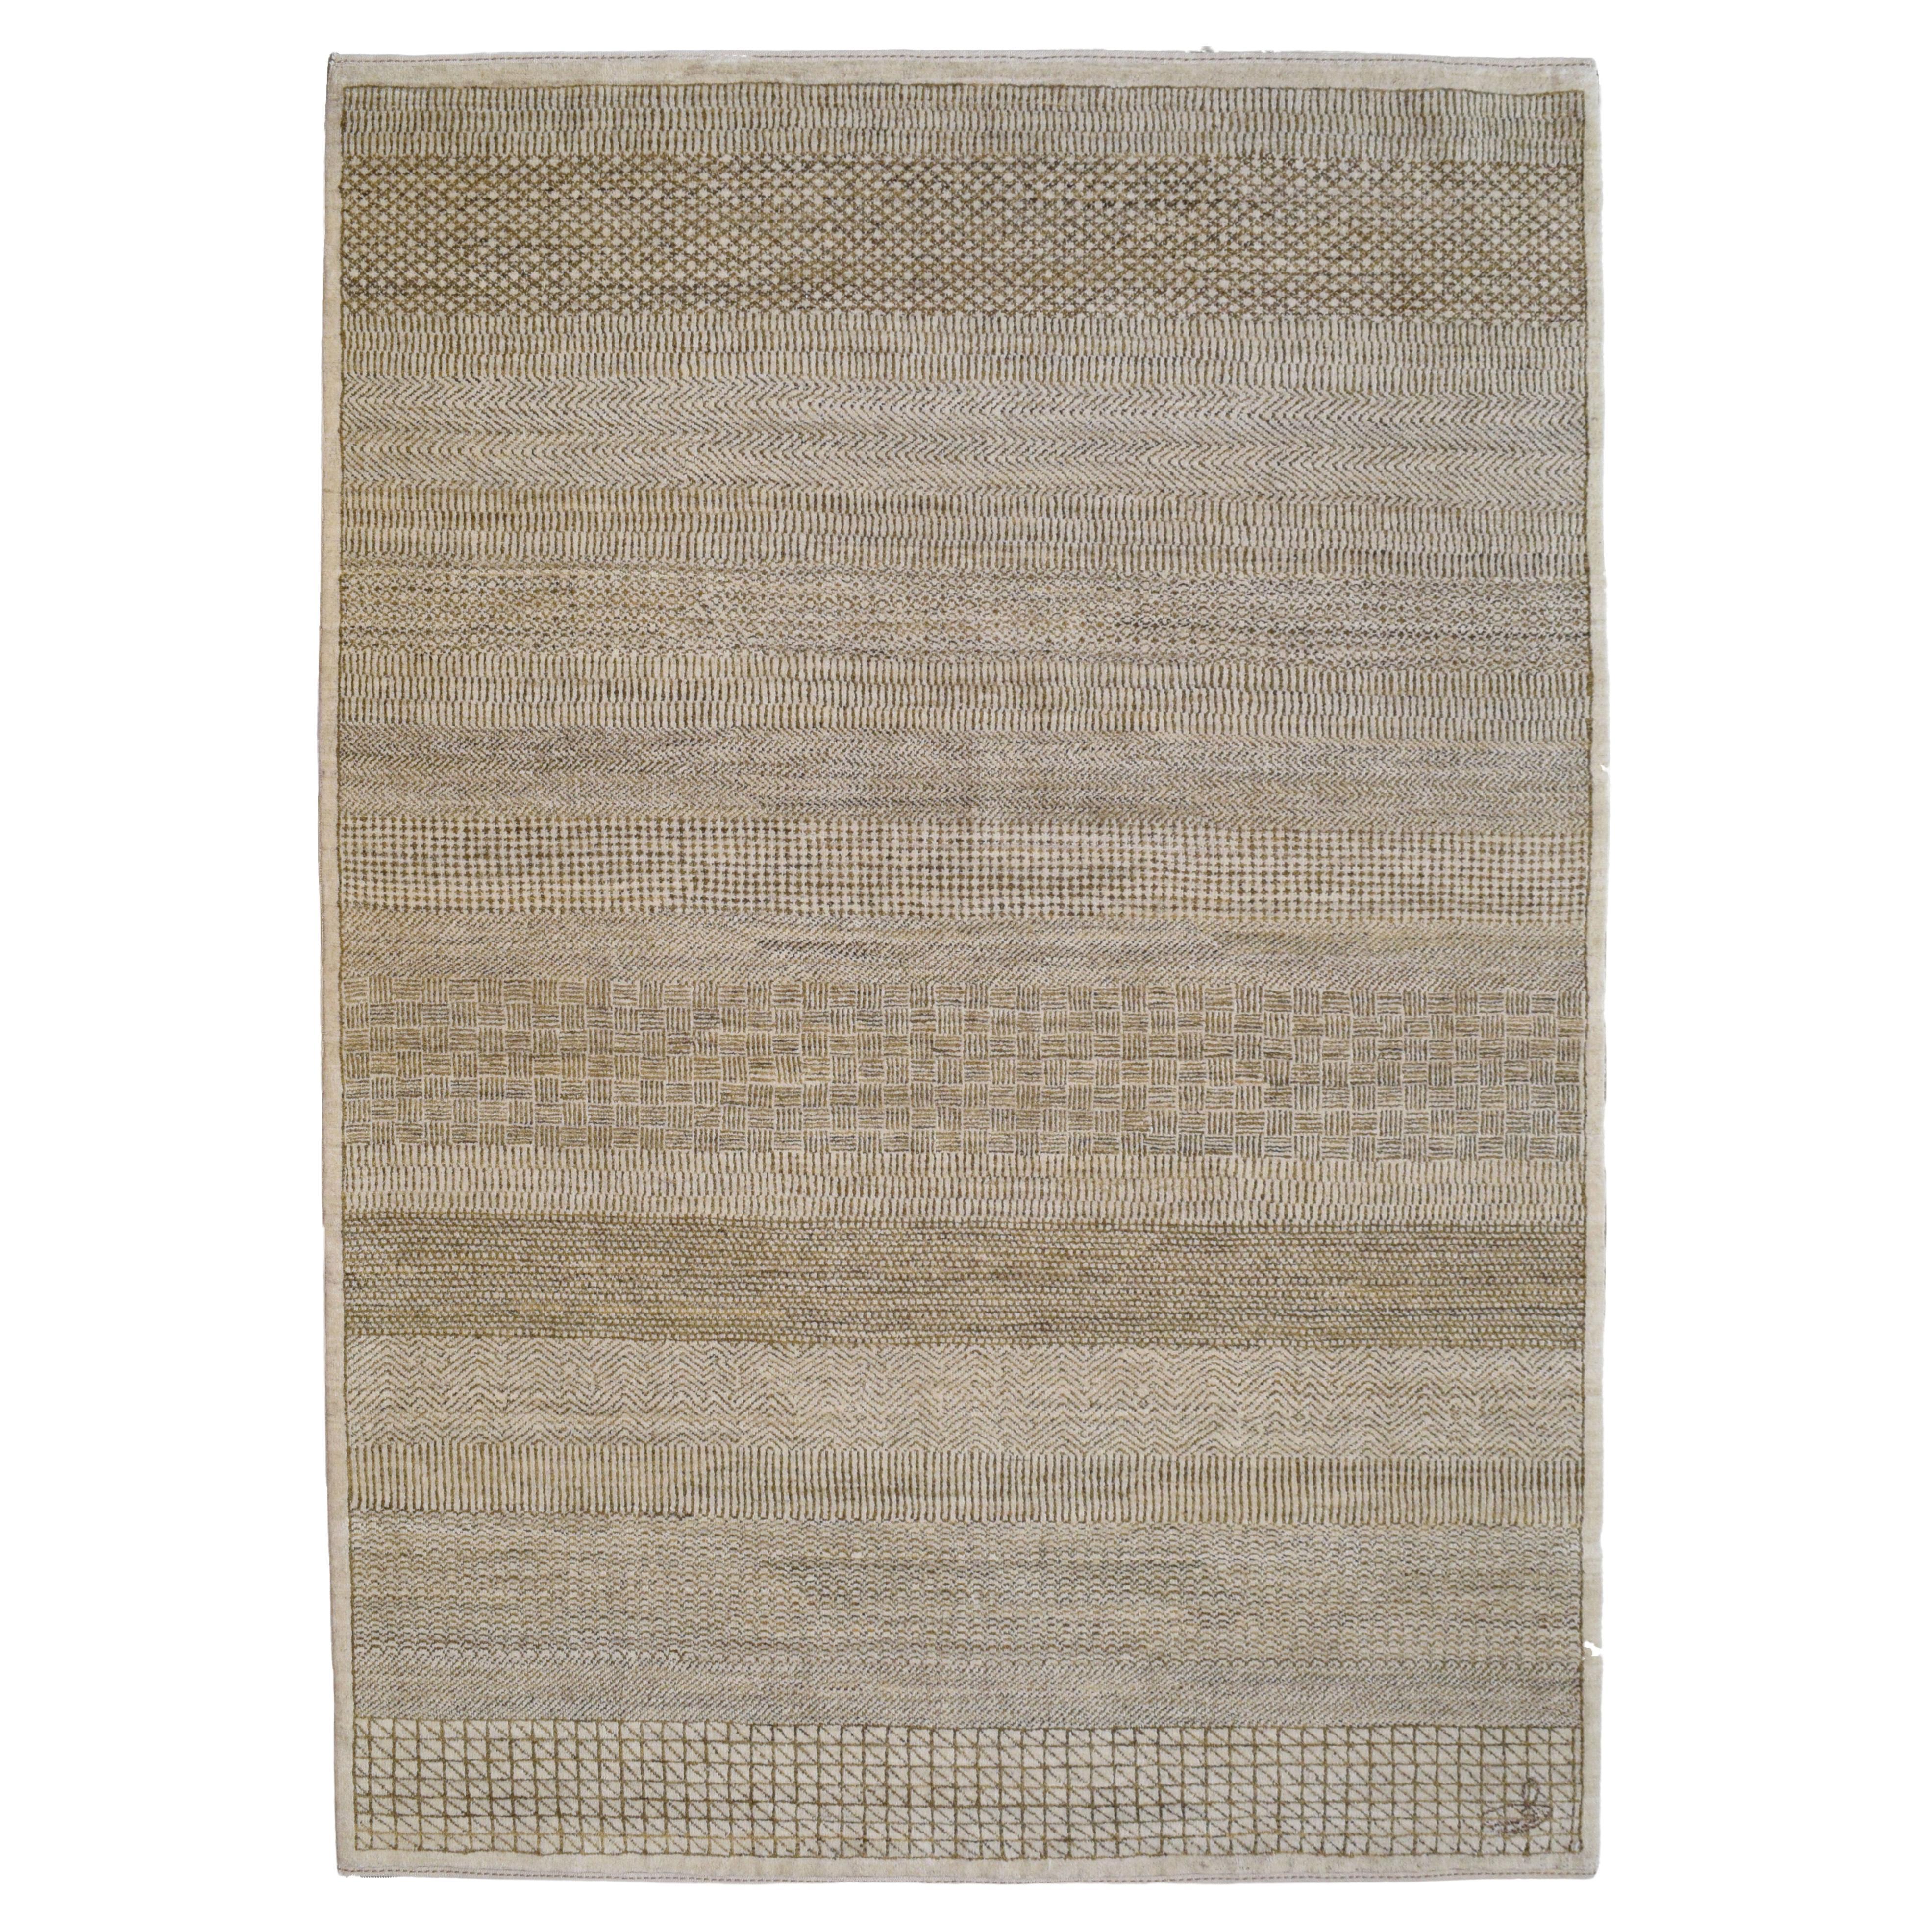 Brown and Cream Modern Persian Area Rug from Orley Shabahang, 5 x 7 For Sale